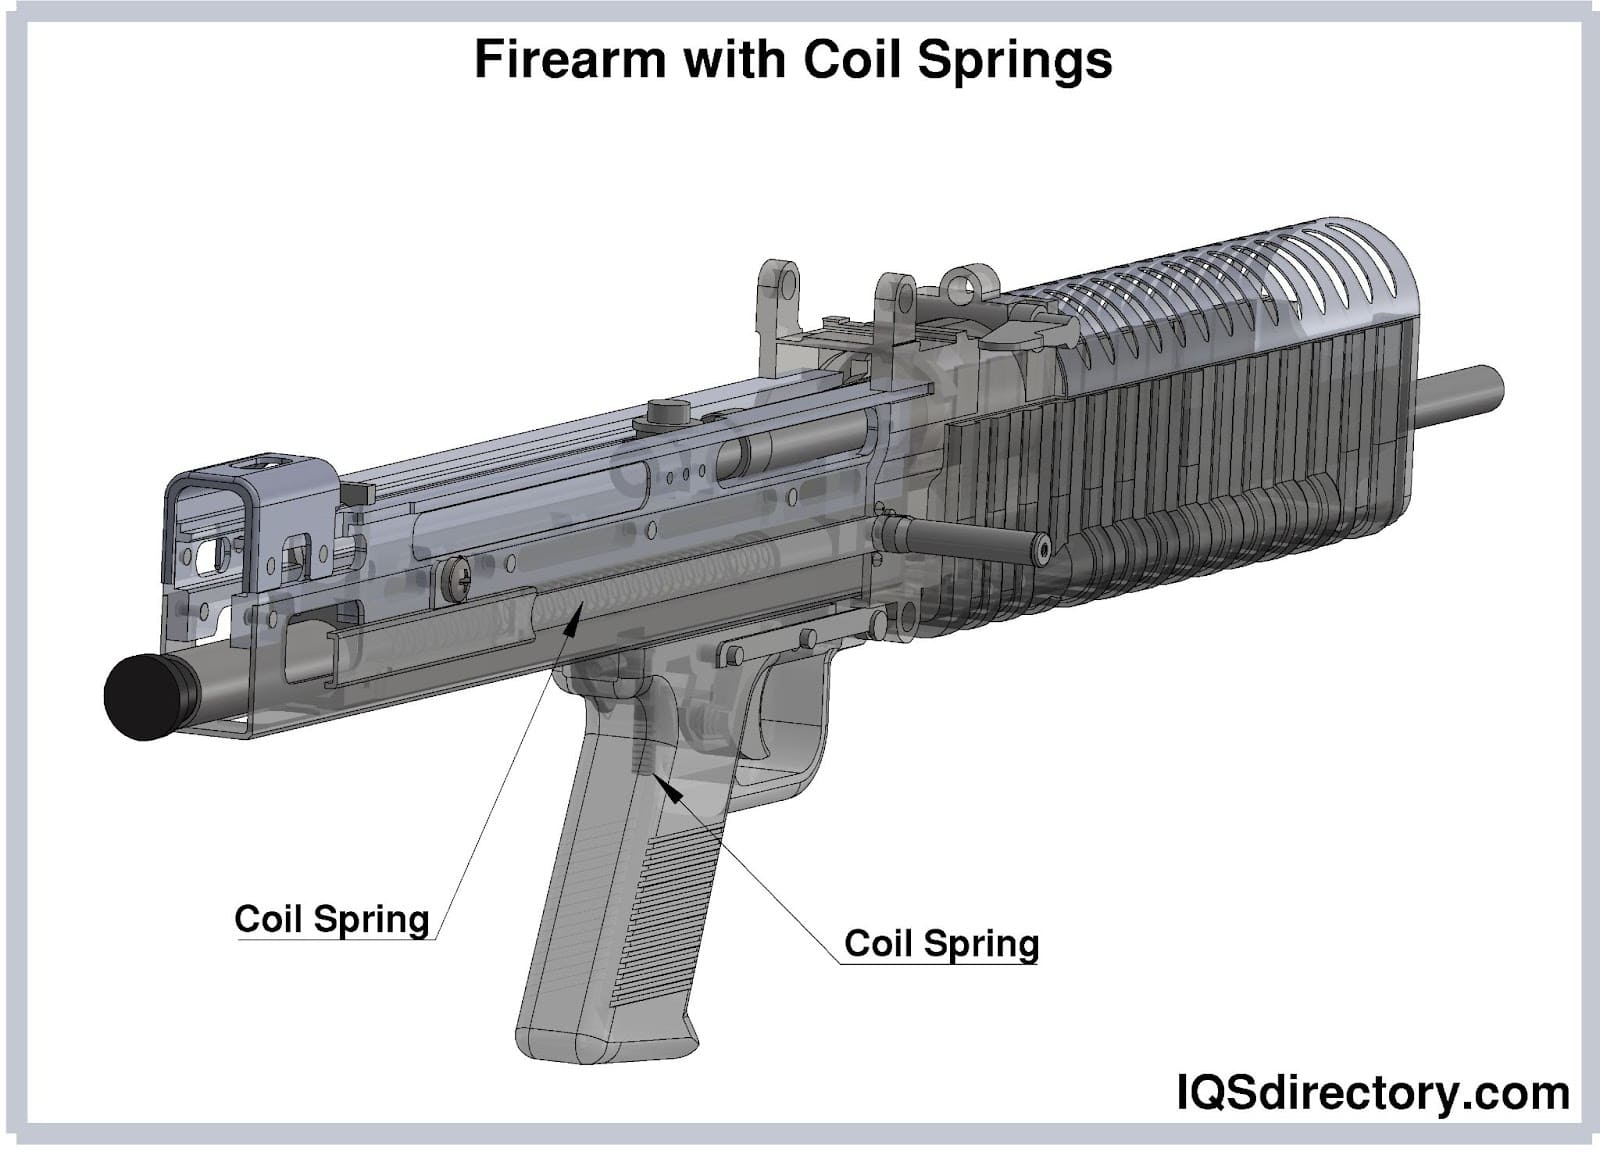 Firearm with Coil Springs